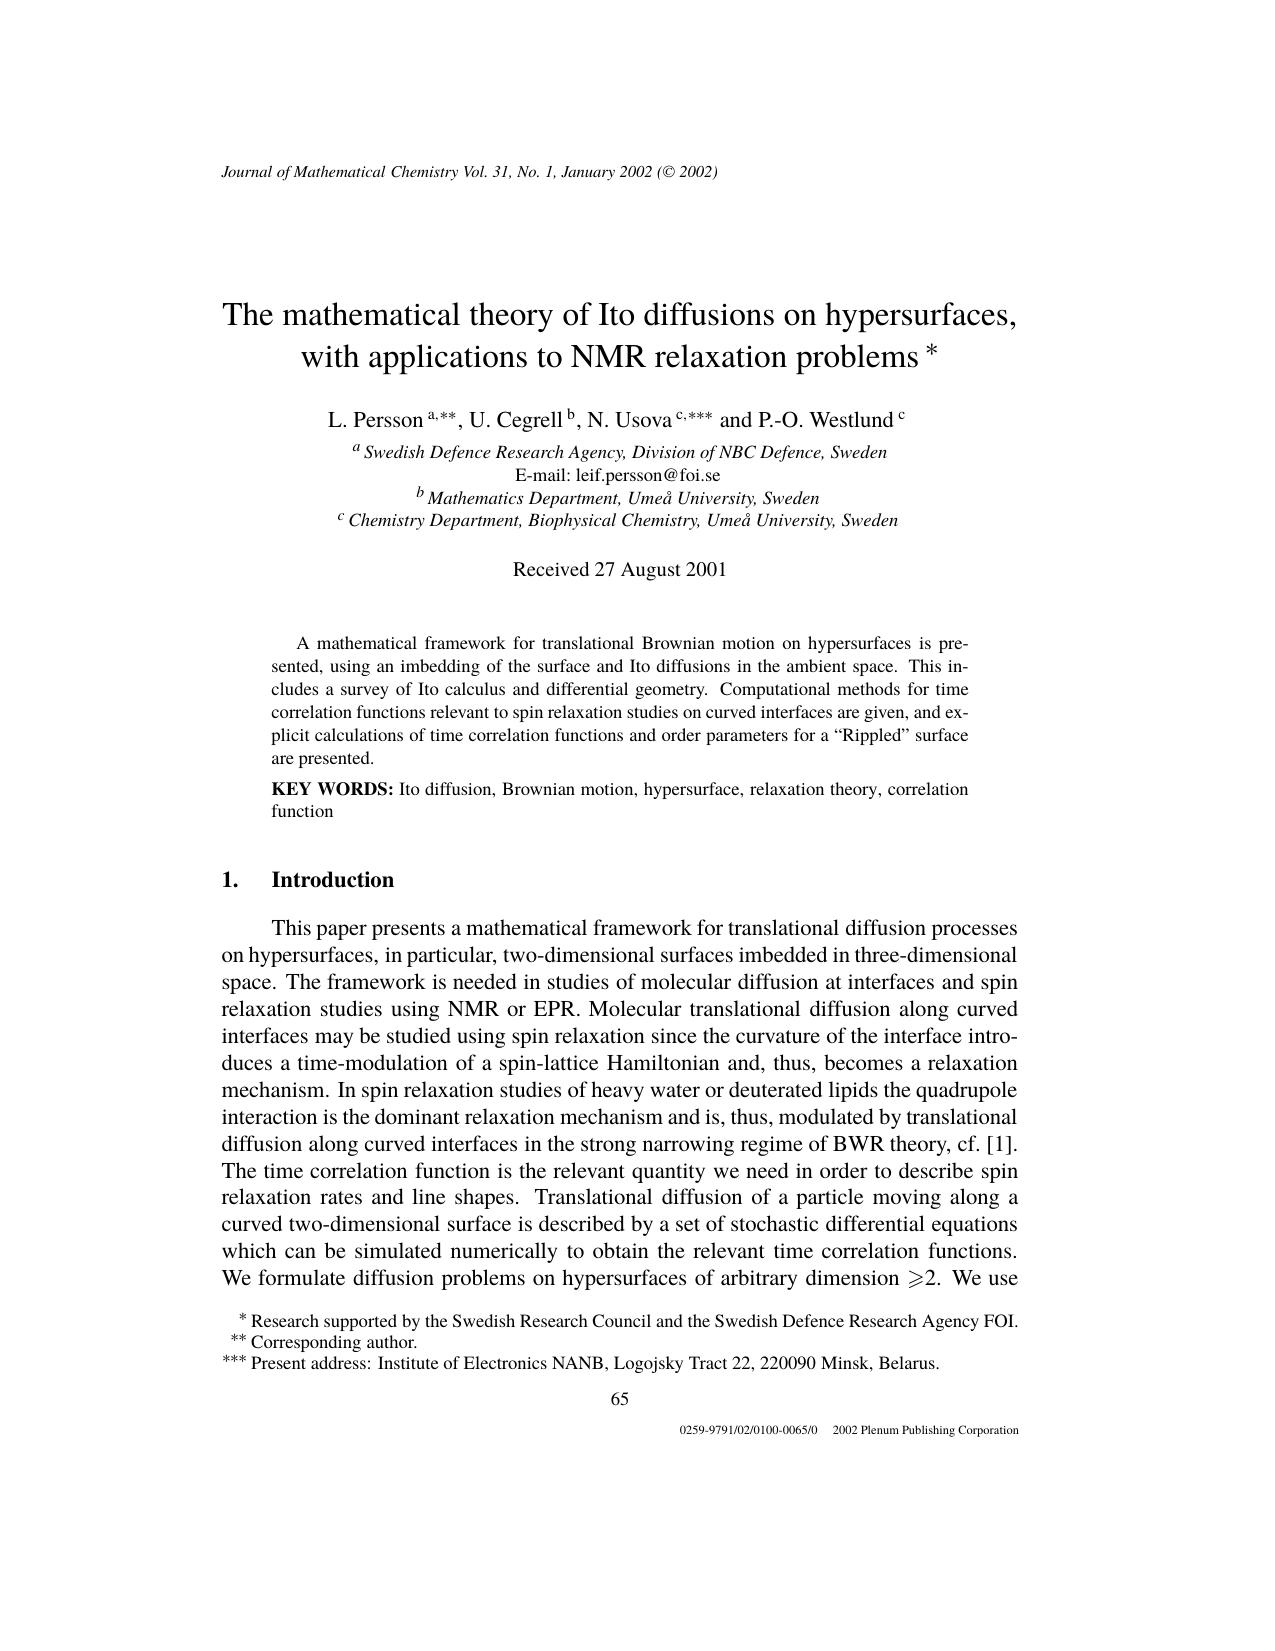 The Mathematical Theory of Ito Diffusions on Hypersurfaces, with Applications to NMR Relaxation Problems by Unknown